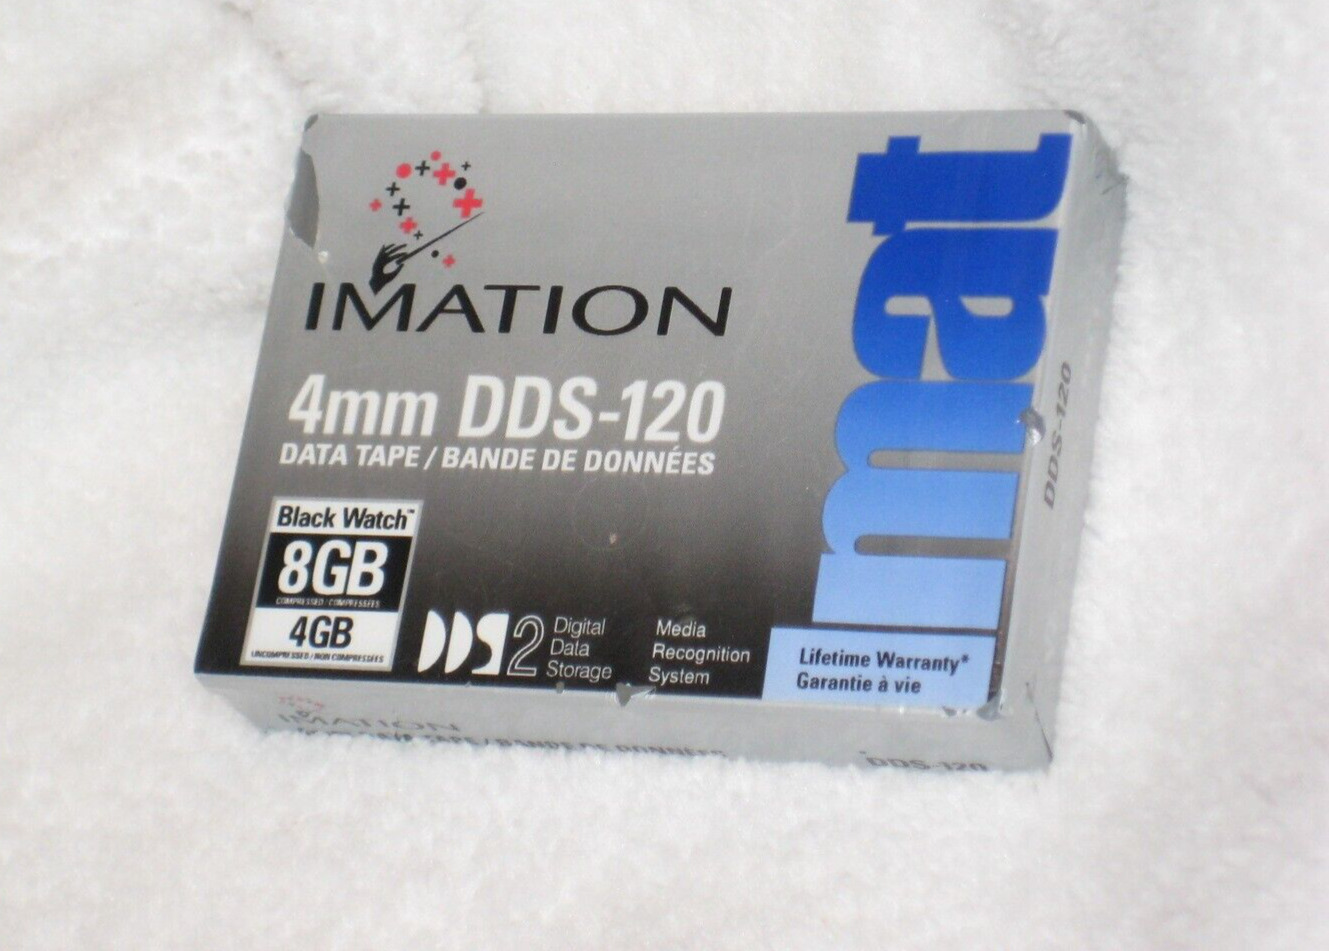 Brand New Imation 4mm DDS-120 Data Tape - 8GB Compressed/4GB Uncompressed